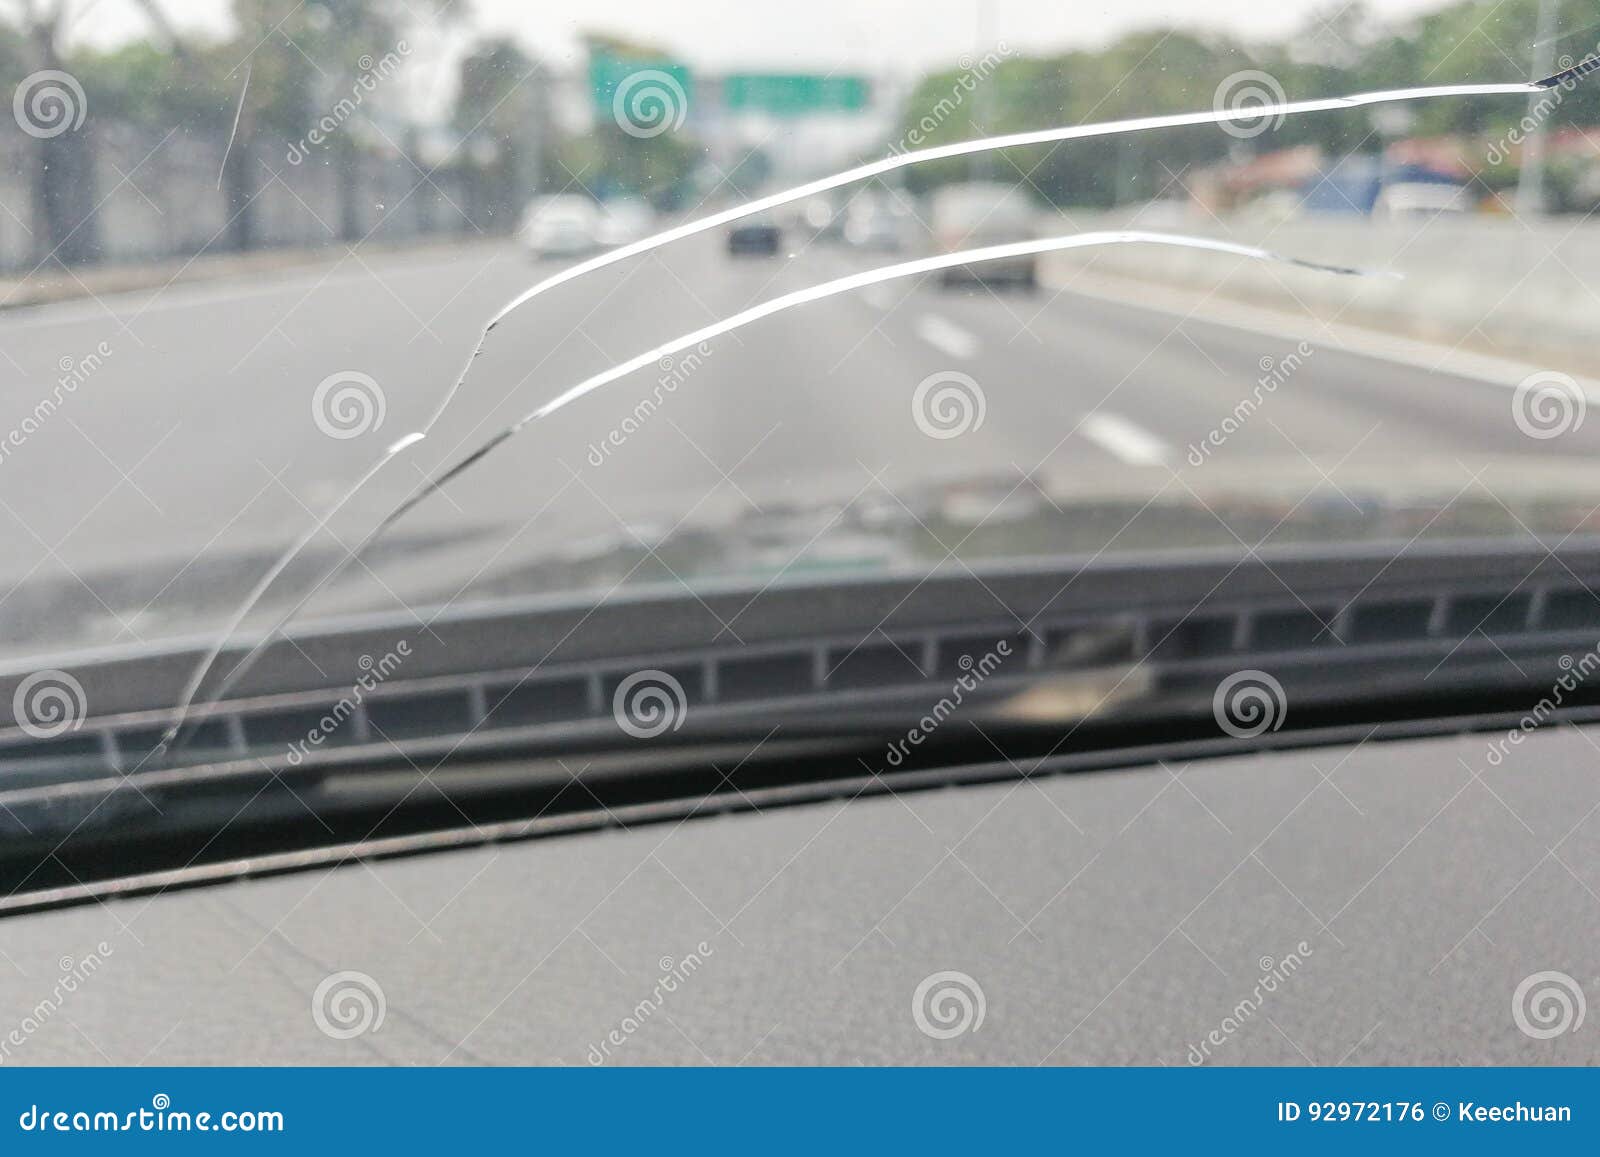 perspective view of cracked car windscreen or windshield while d